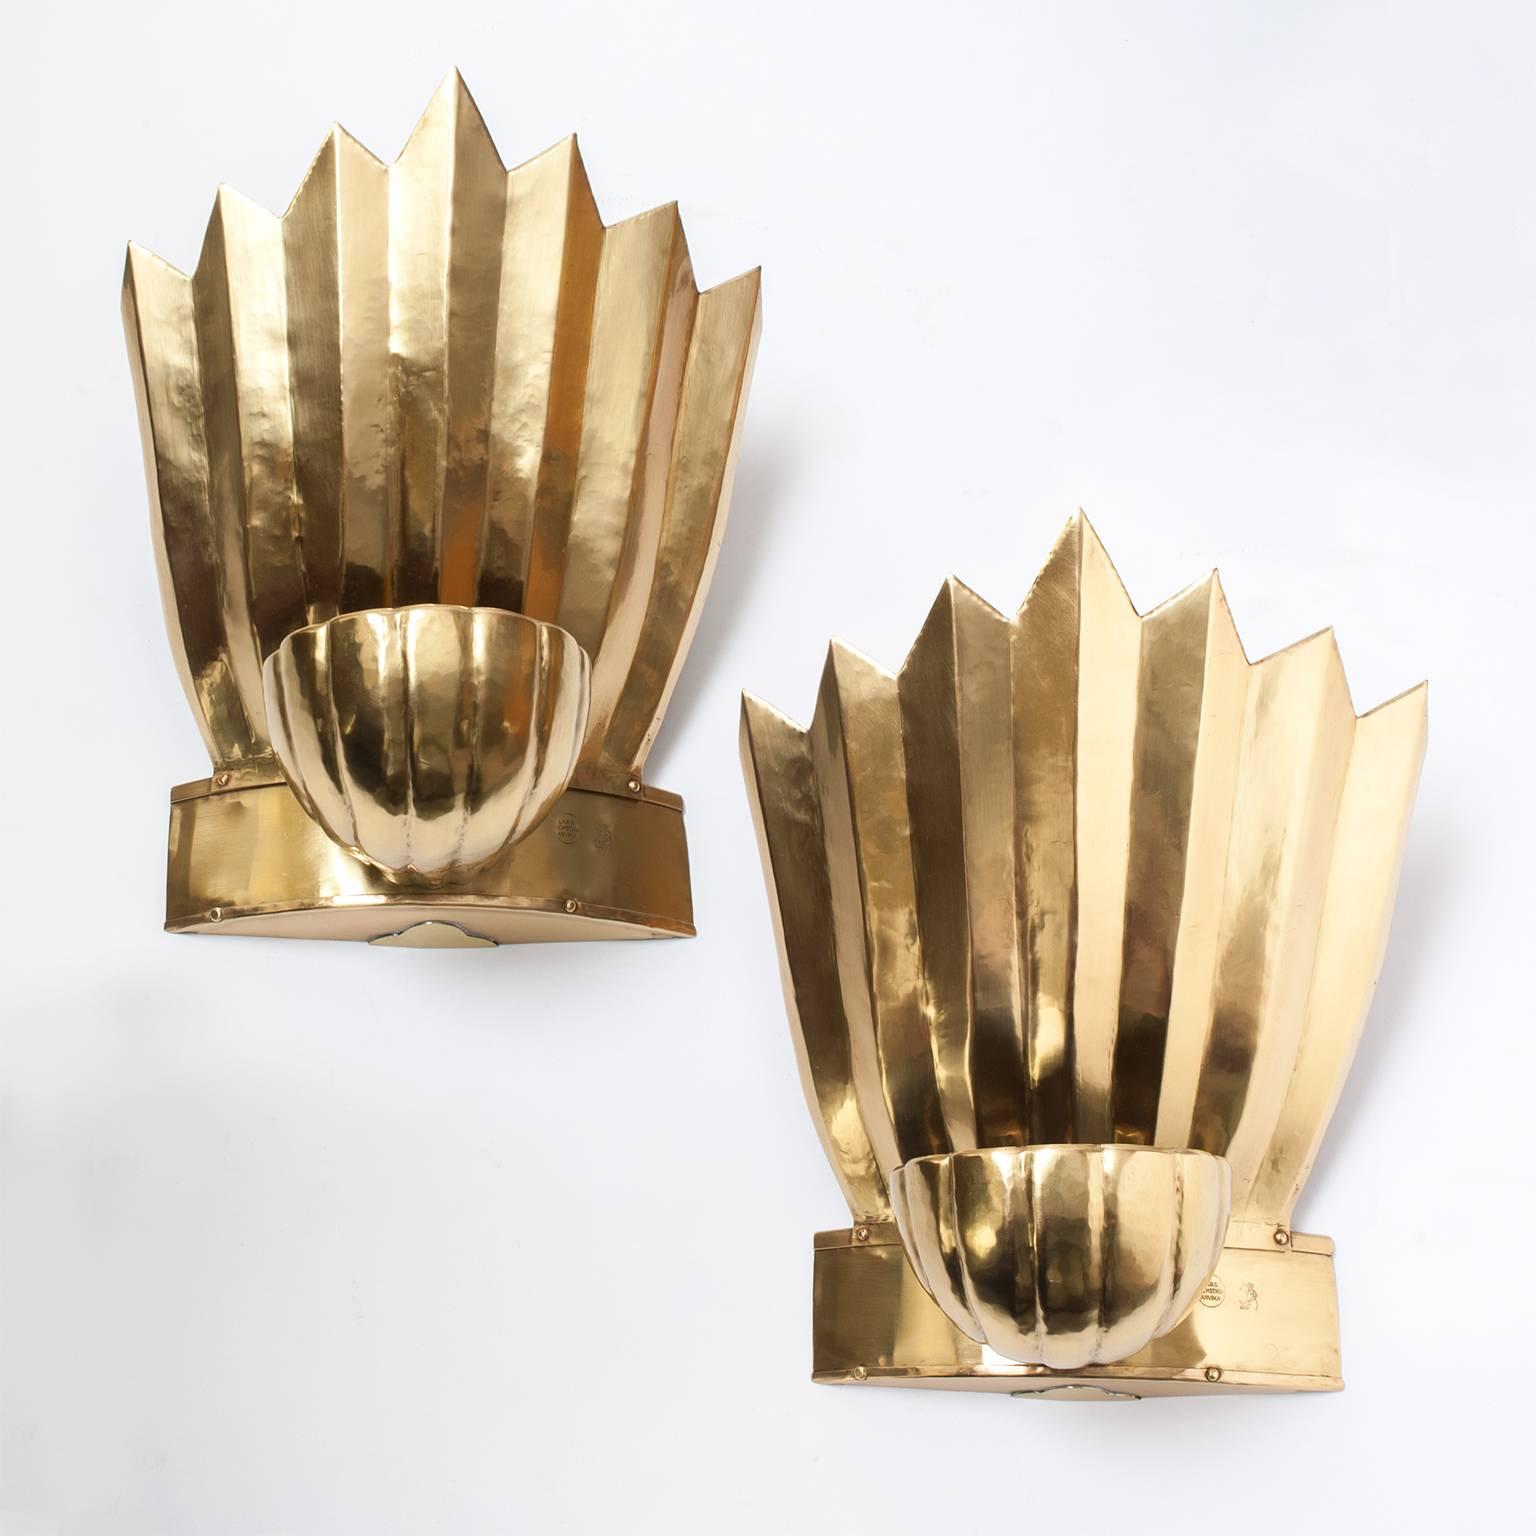 Pair of Scandinavian Modern, Swedish Grace / Art Deco large polished brass sconces designed by Lars Holmstrom for Arvika Konsthantverk (mark impressed), The sconces have two light sources one inside the shell shaped shade which reflects light to the